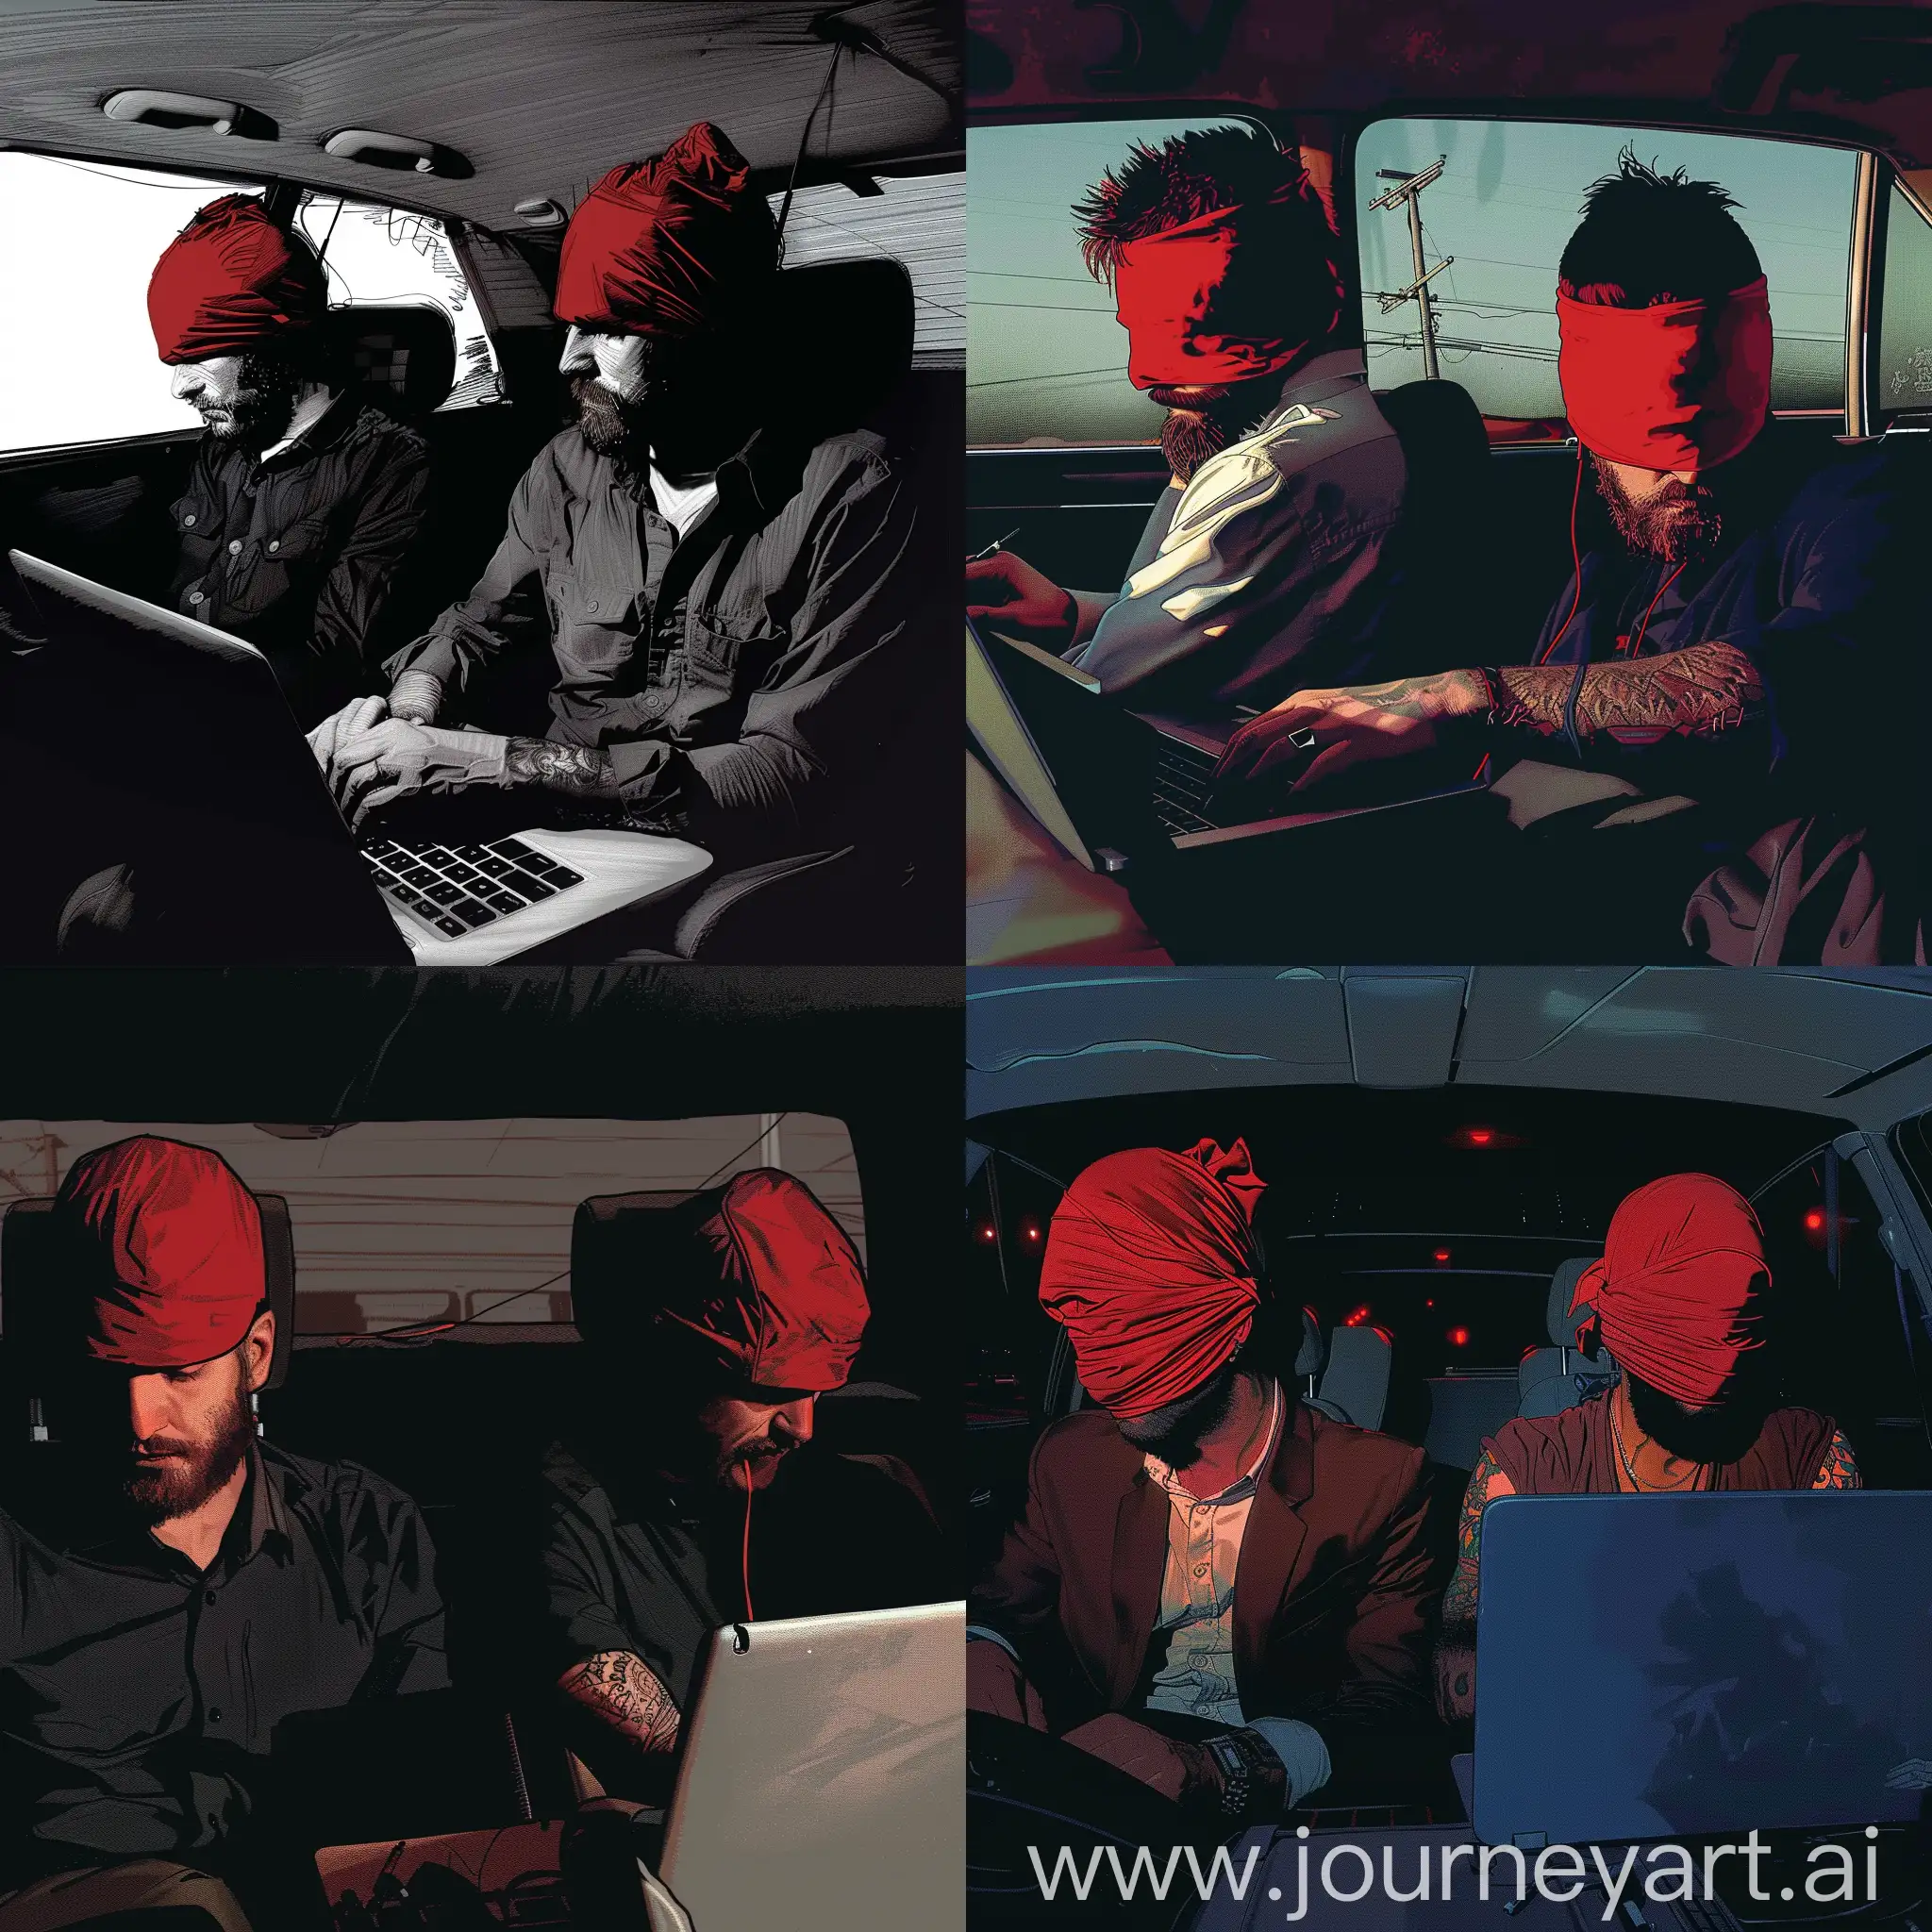 Two-Men-Creating-Music-on-Laptop-in-Car-with-Tattoo